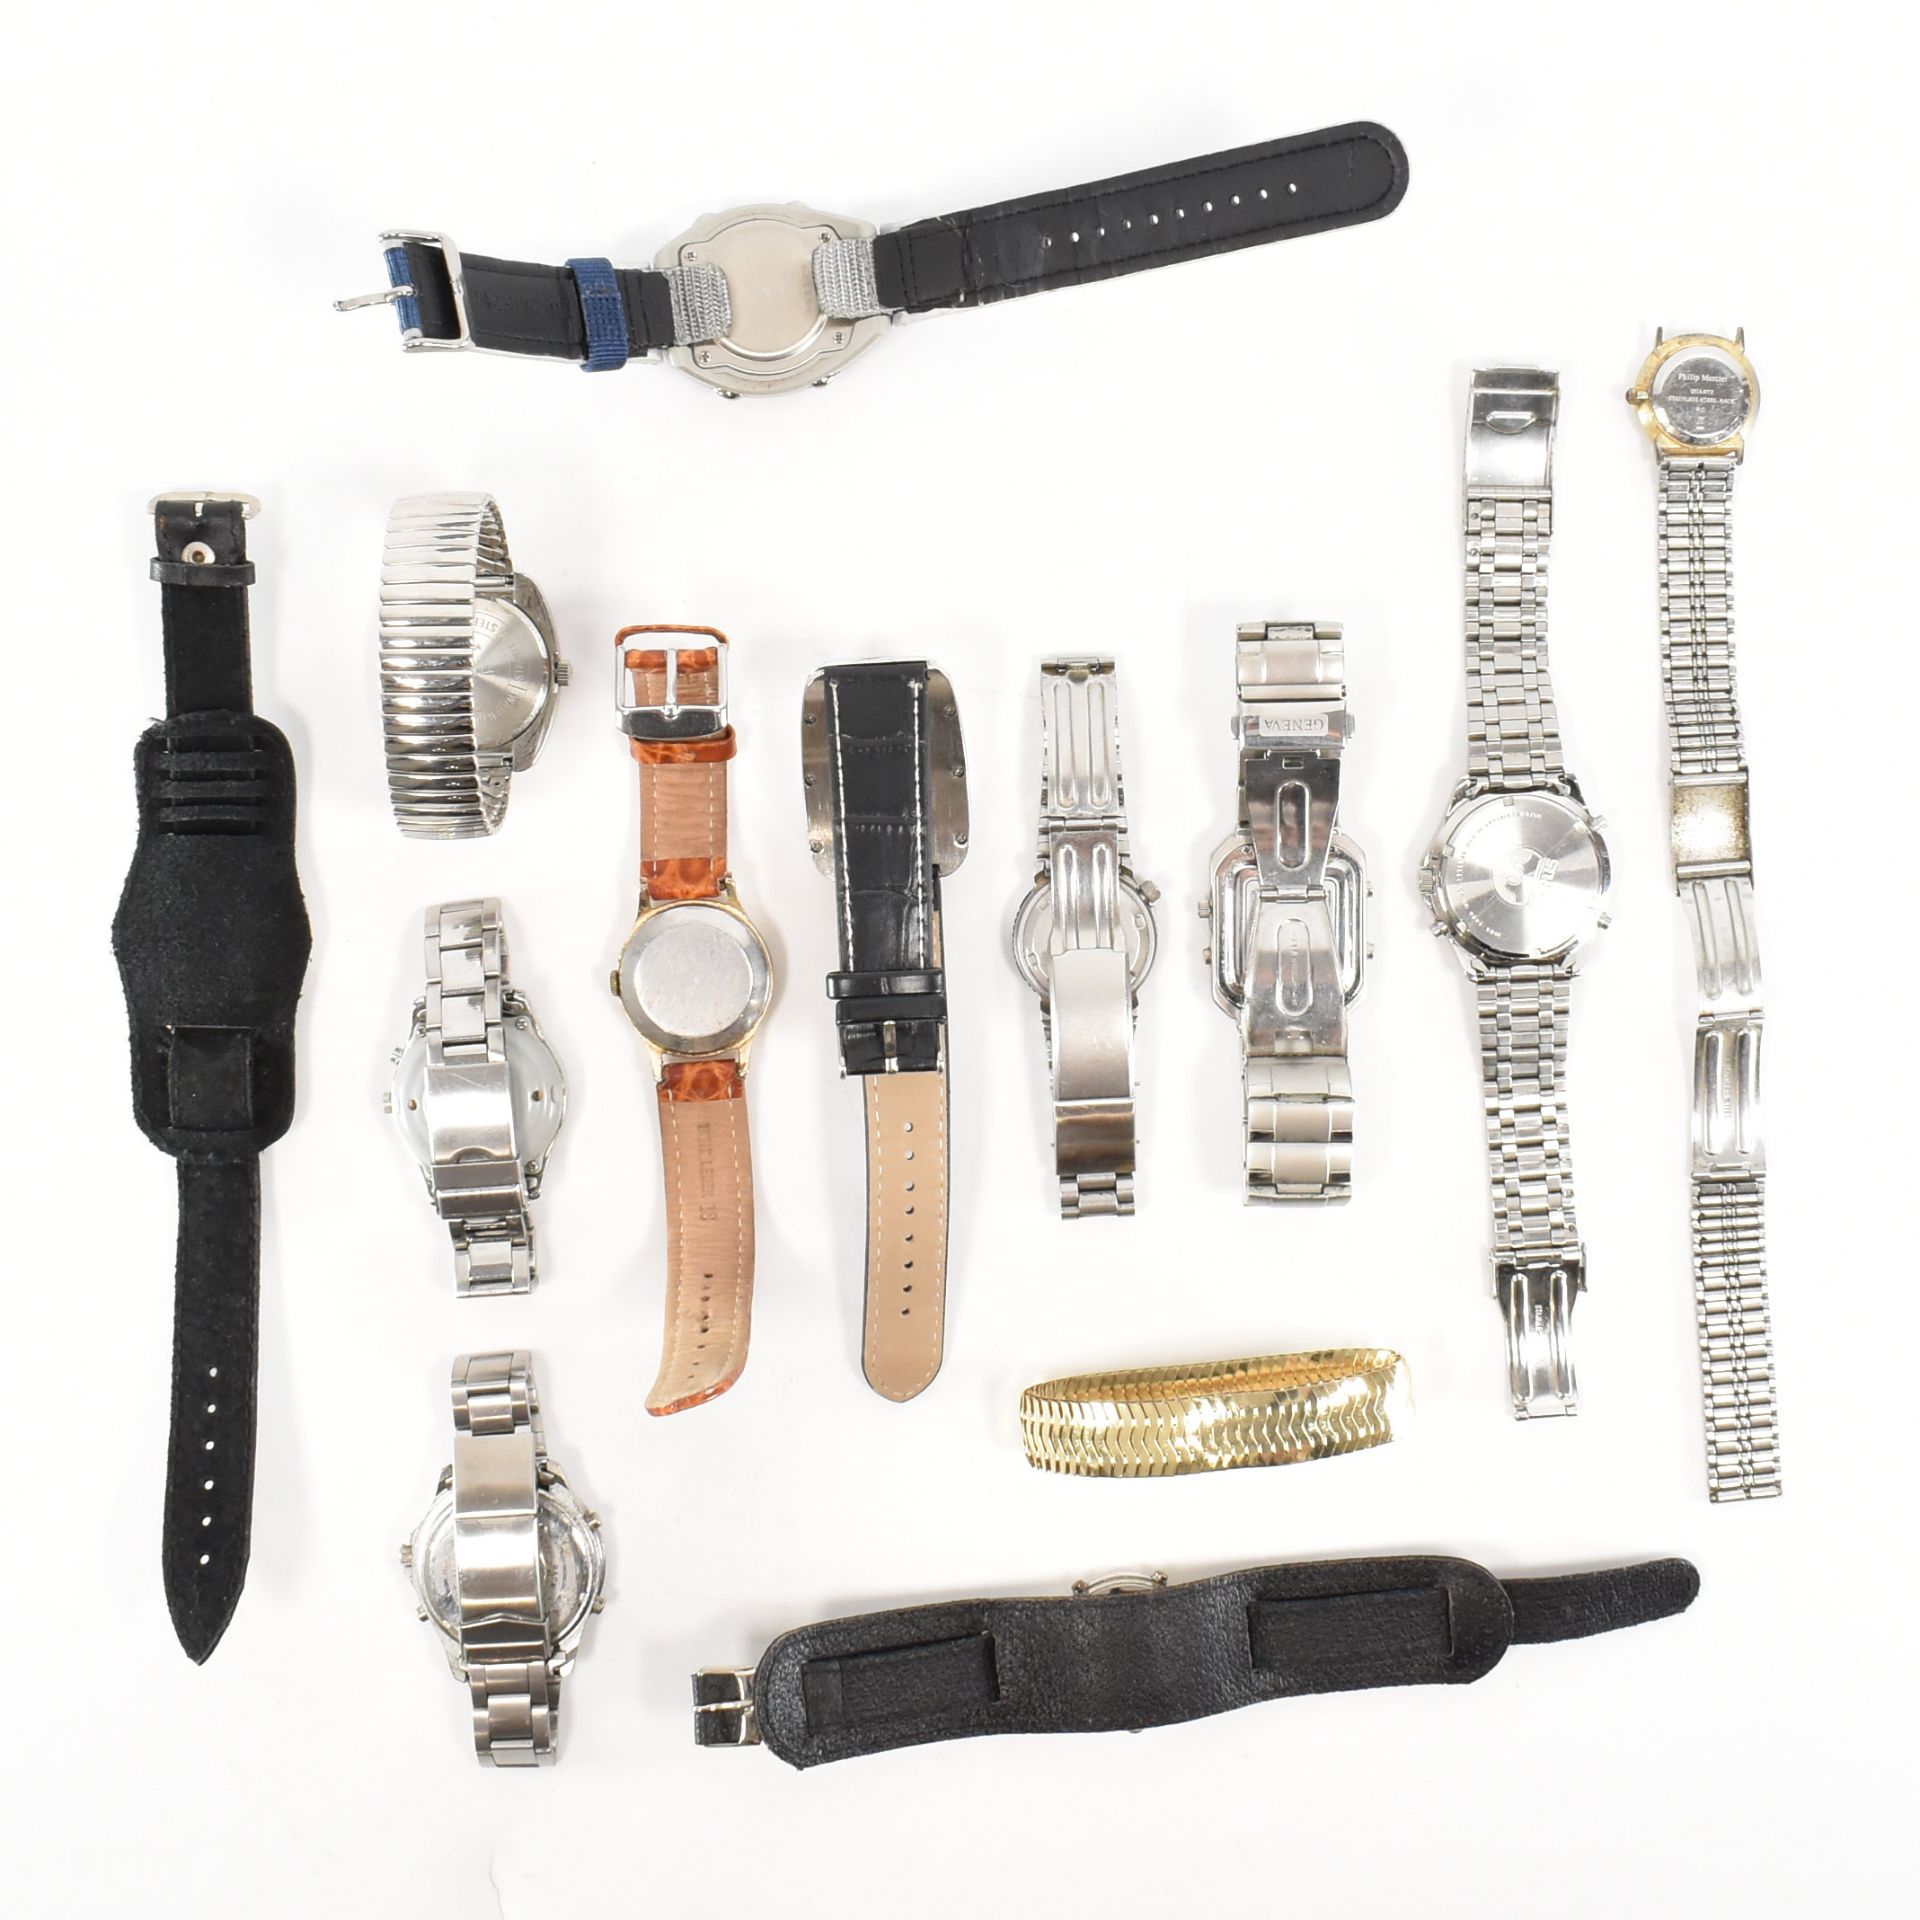 COLLECTION OF VINTAGE WRIST WATCHES - Image 2 of 2